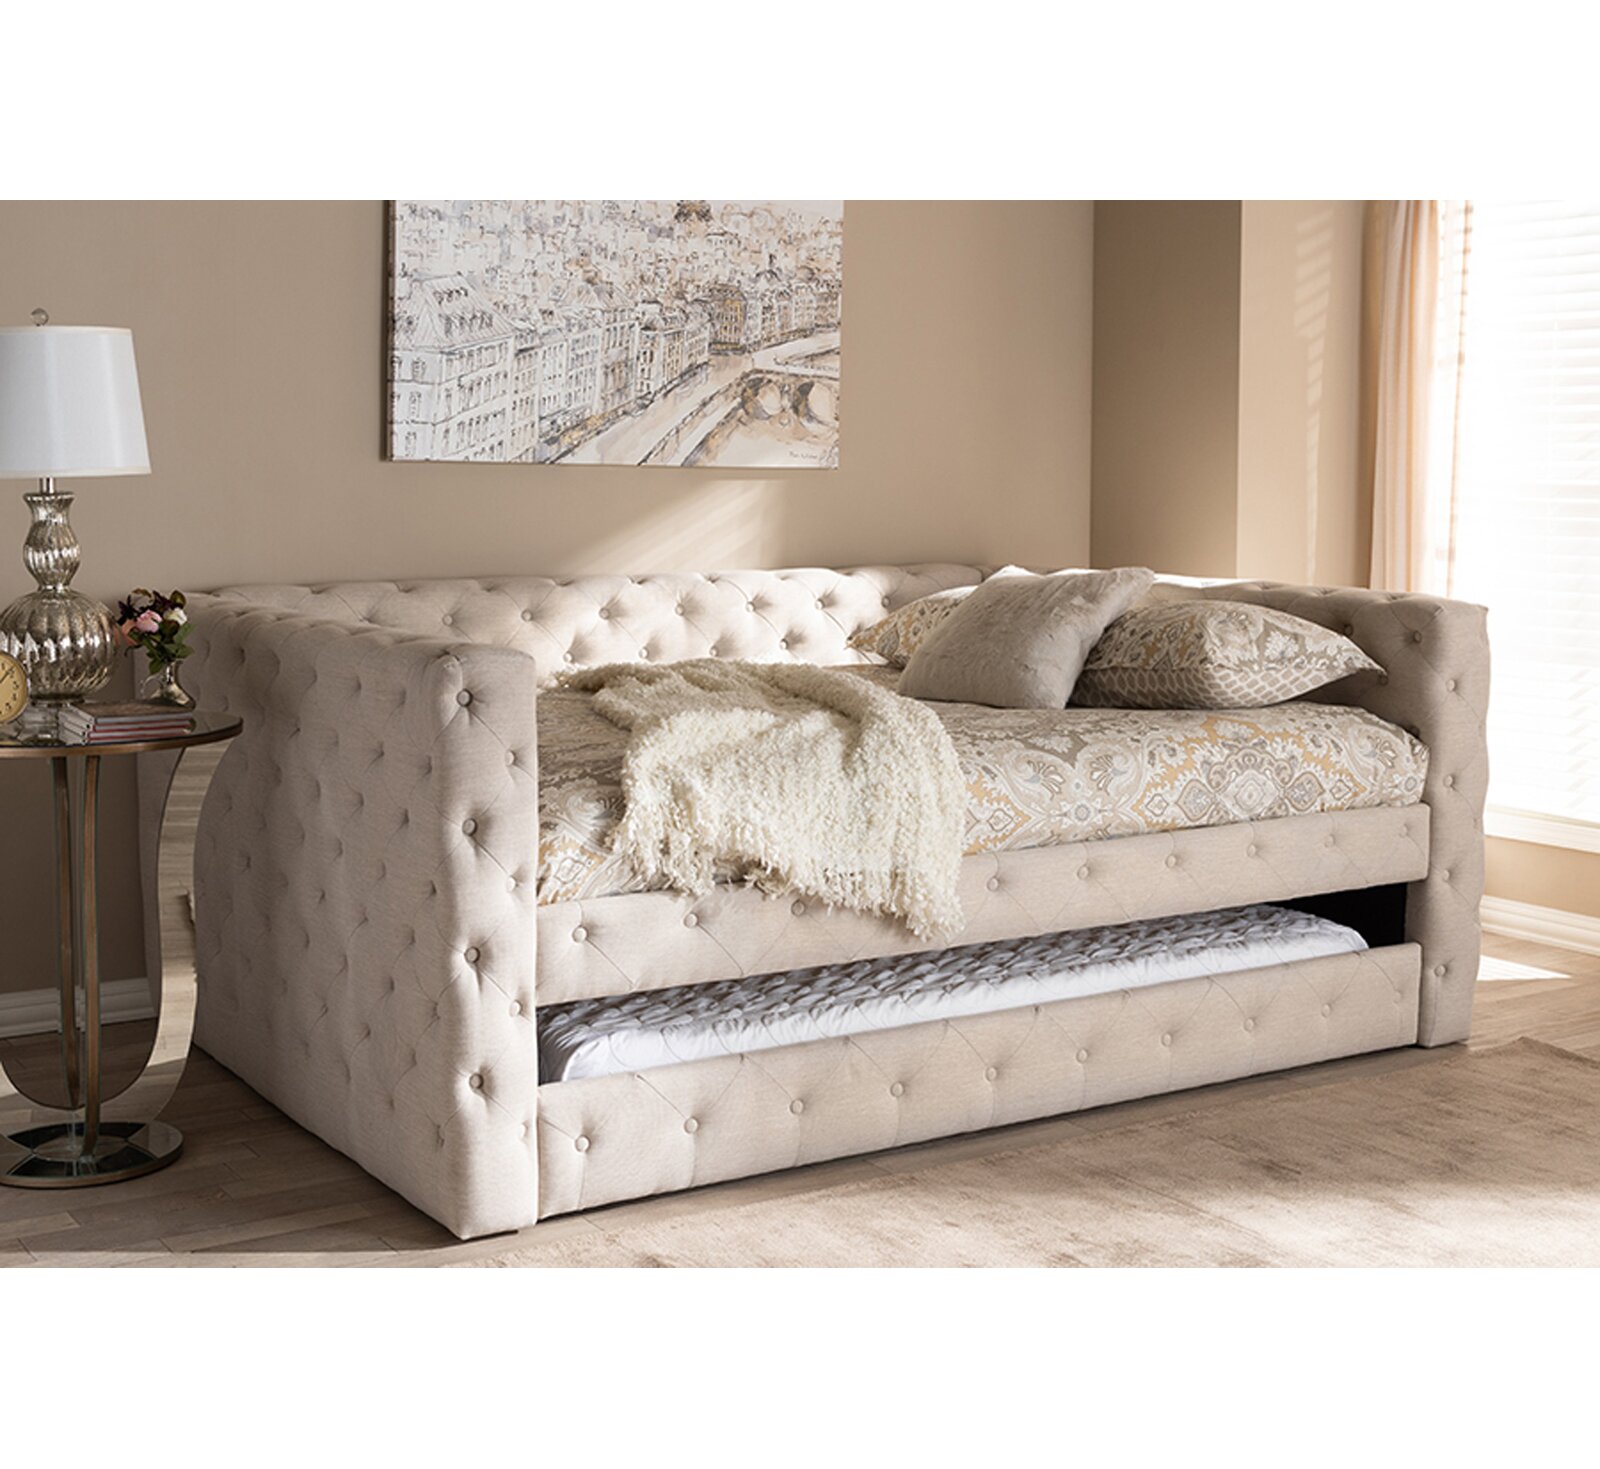 Wildon Home Bork Upholstered Daybed with Trundle